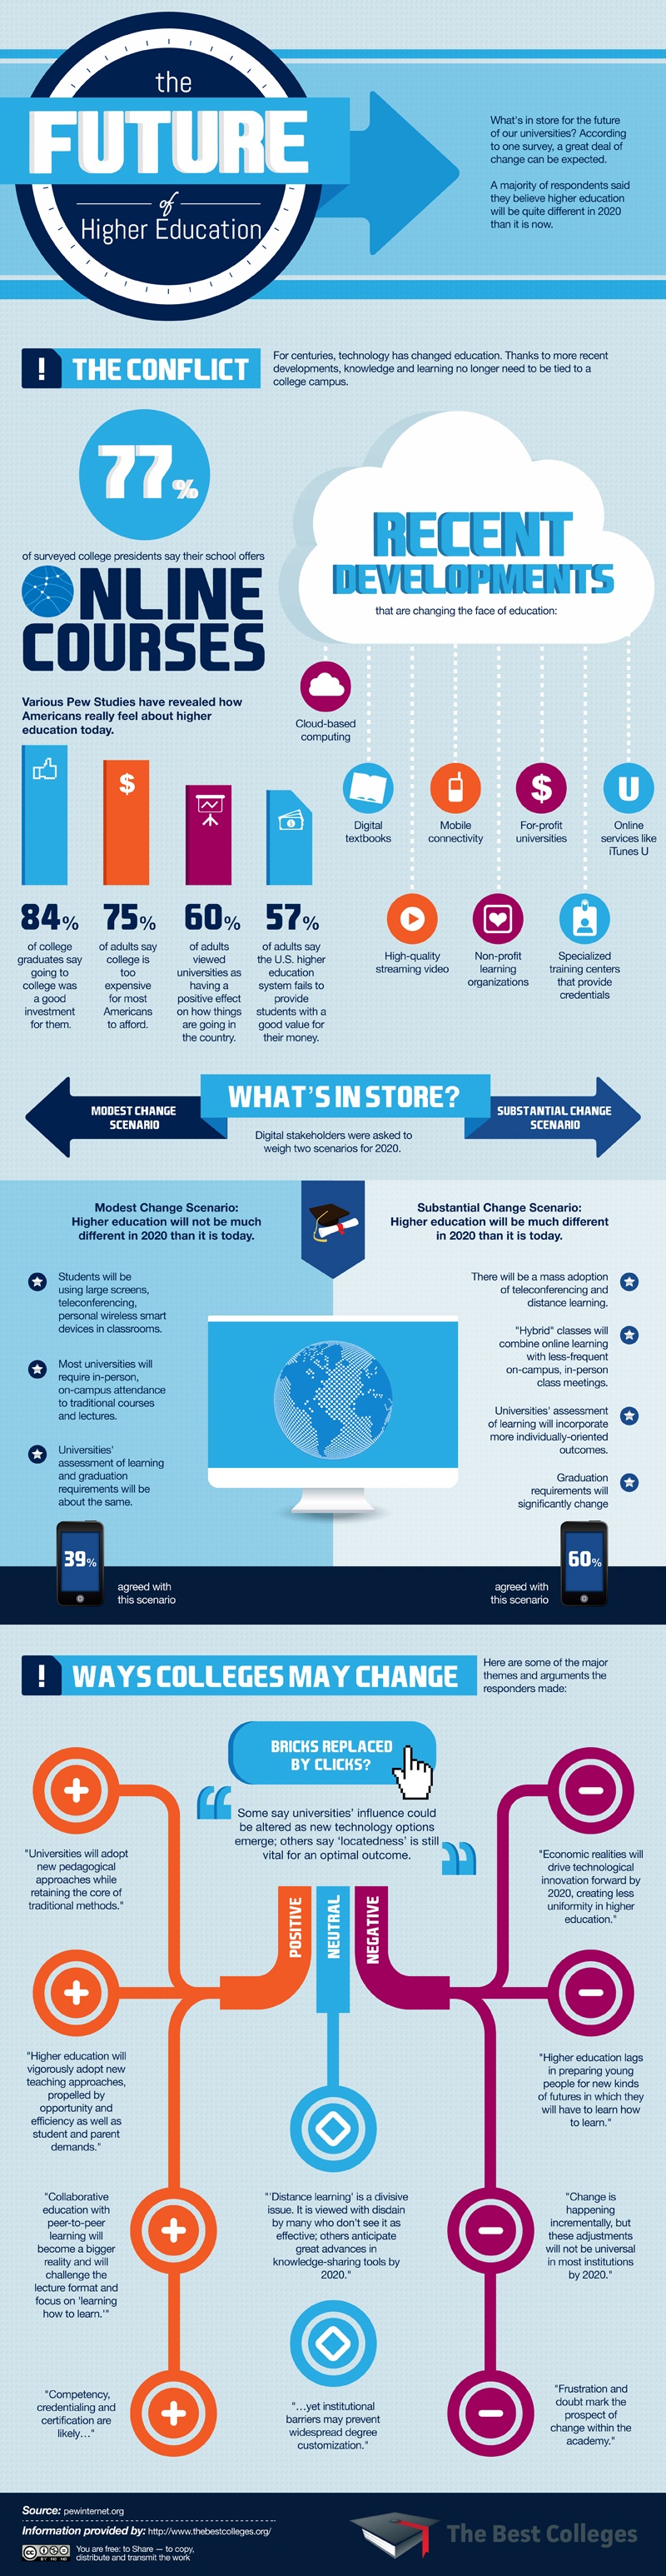 The Future of Higher Education Infographic